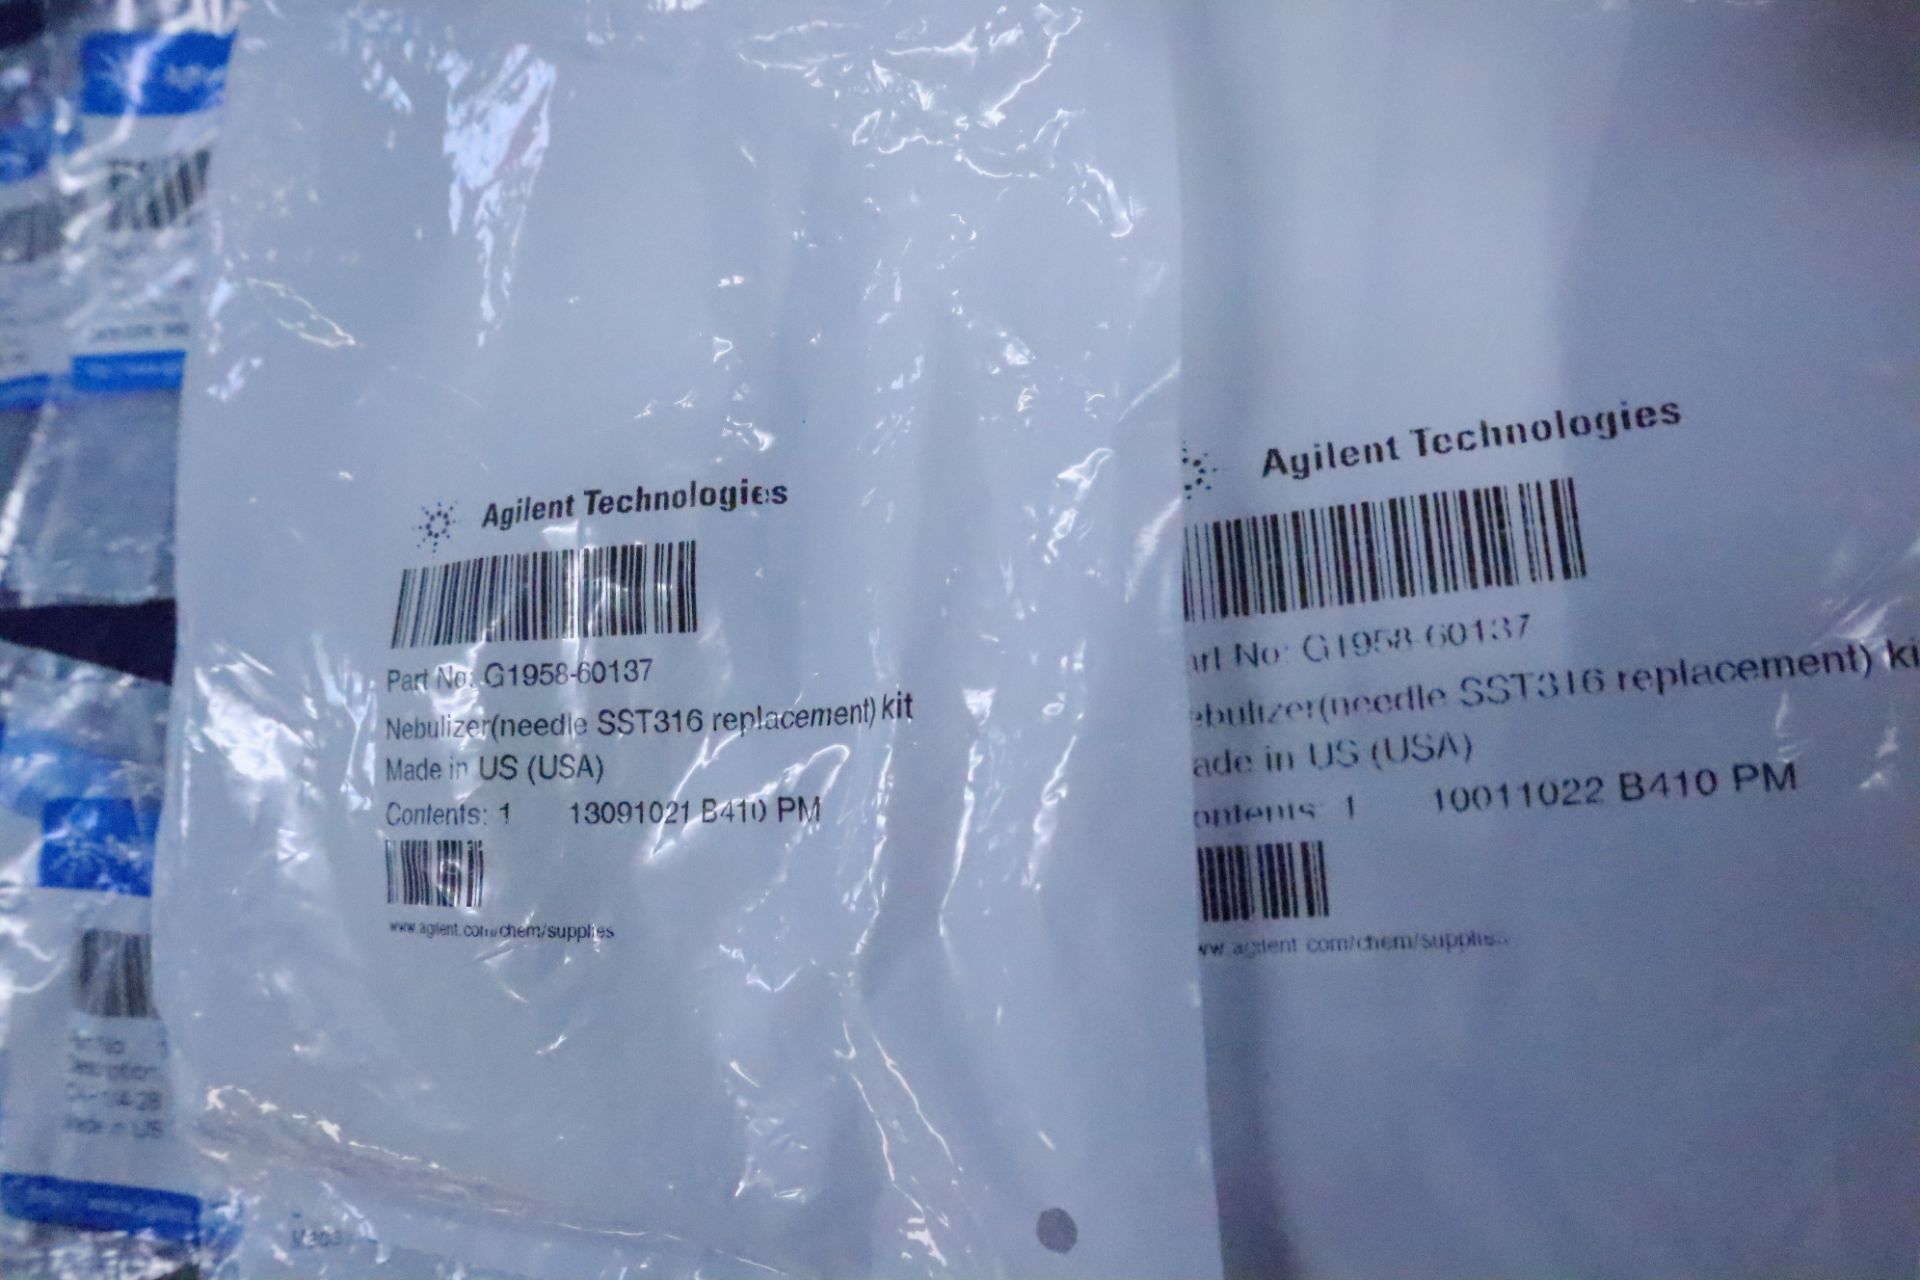 UPDATED PHOTOS Agilent Technologies OEM Replacement Parts and tool kits for LC/MS Machines - Image 37 of 37